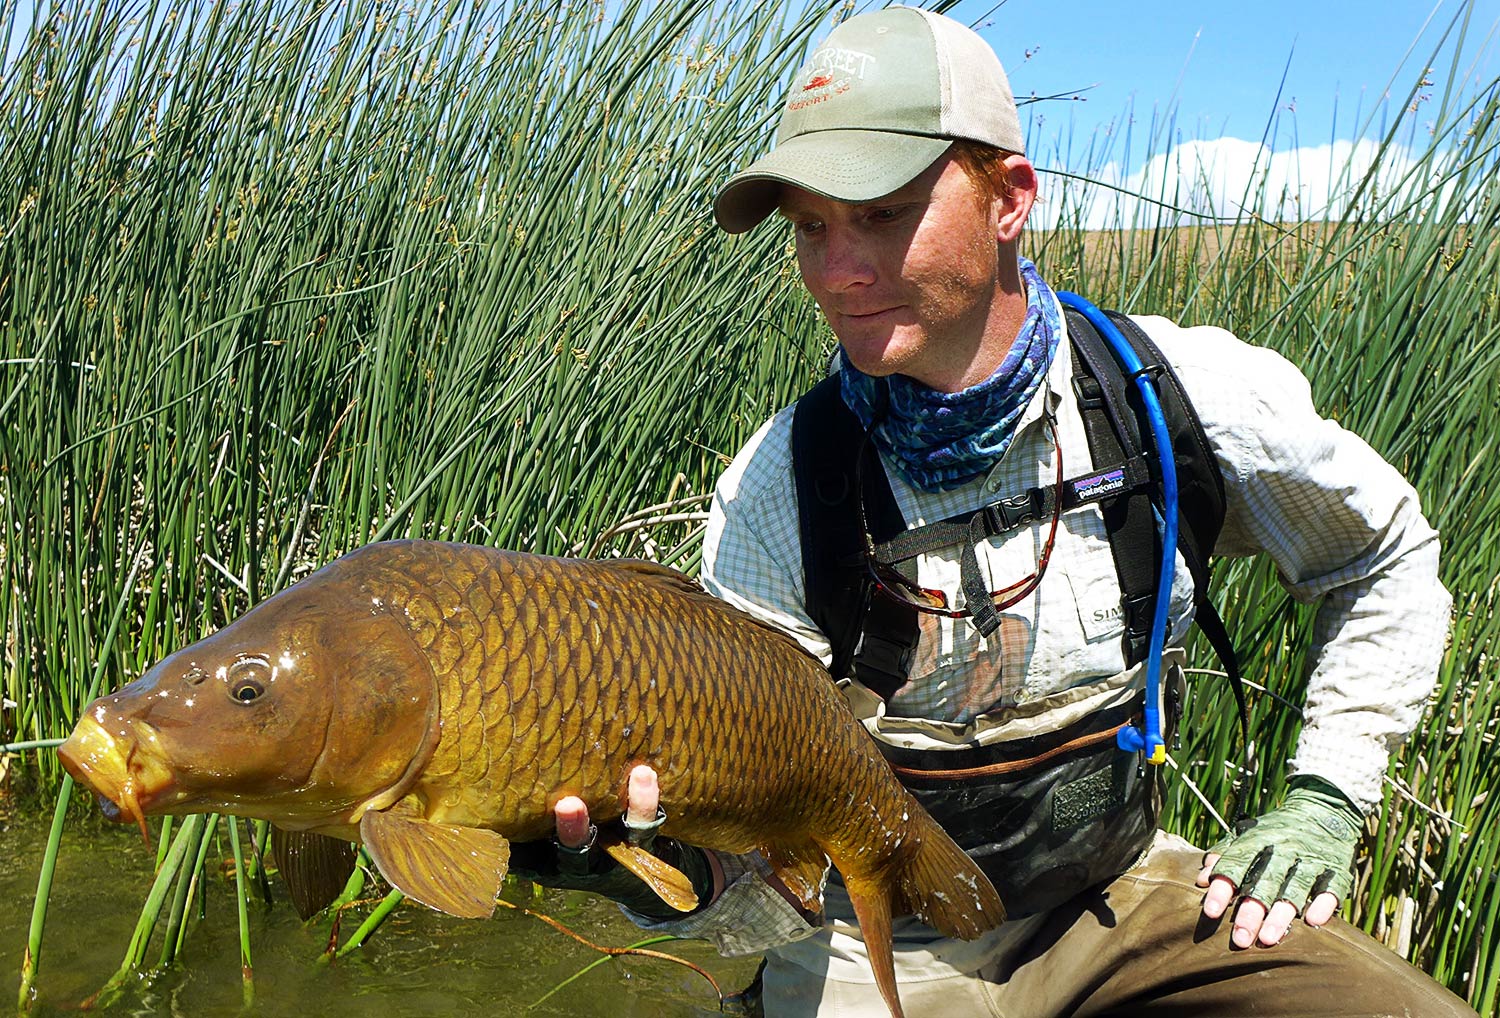 carp fishing - Fly Fishing, Gink and Gasoline, How to Fly Fish, Trout  Fishing, Fly Tying